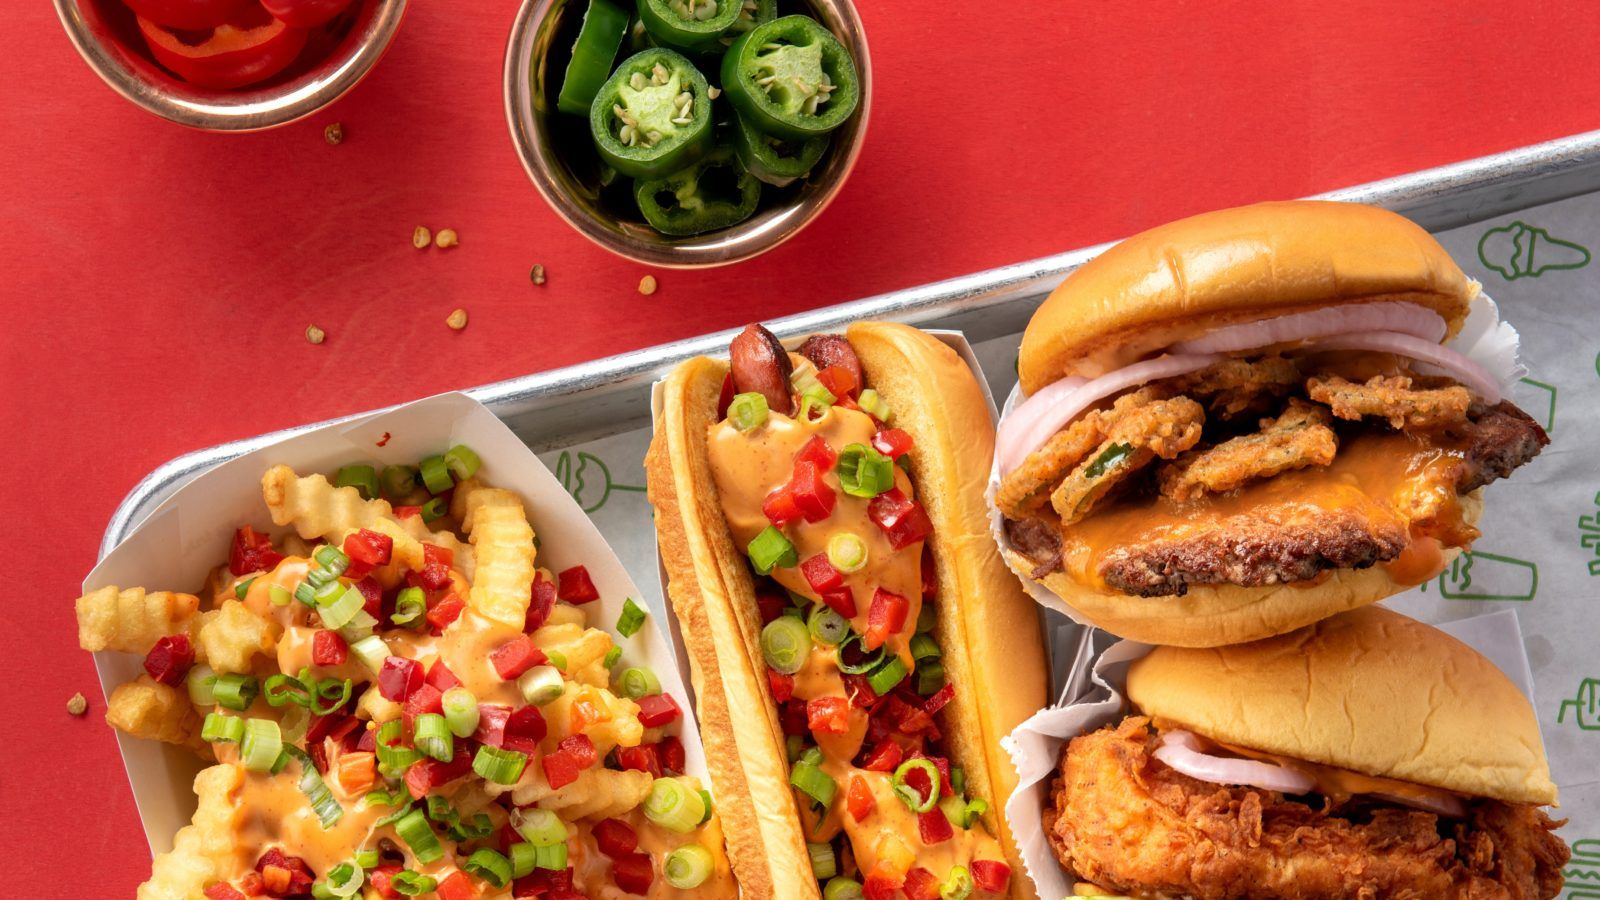 It’s here! A new limited-time chipotle cheesy menu at Shake Shack